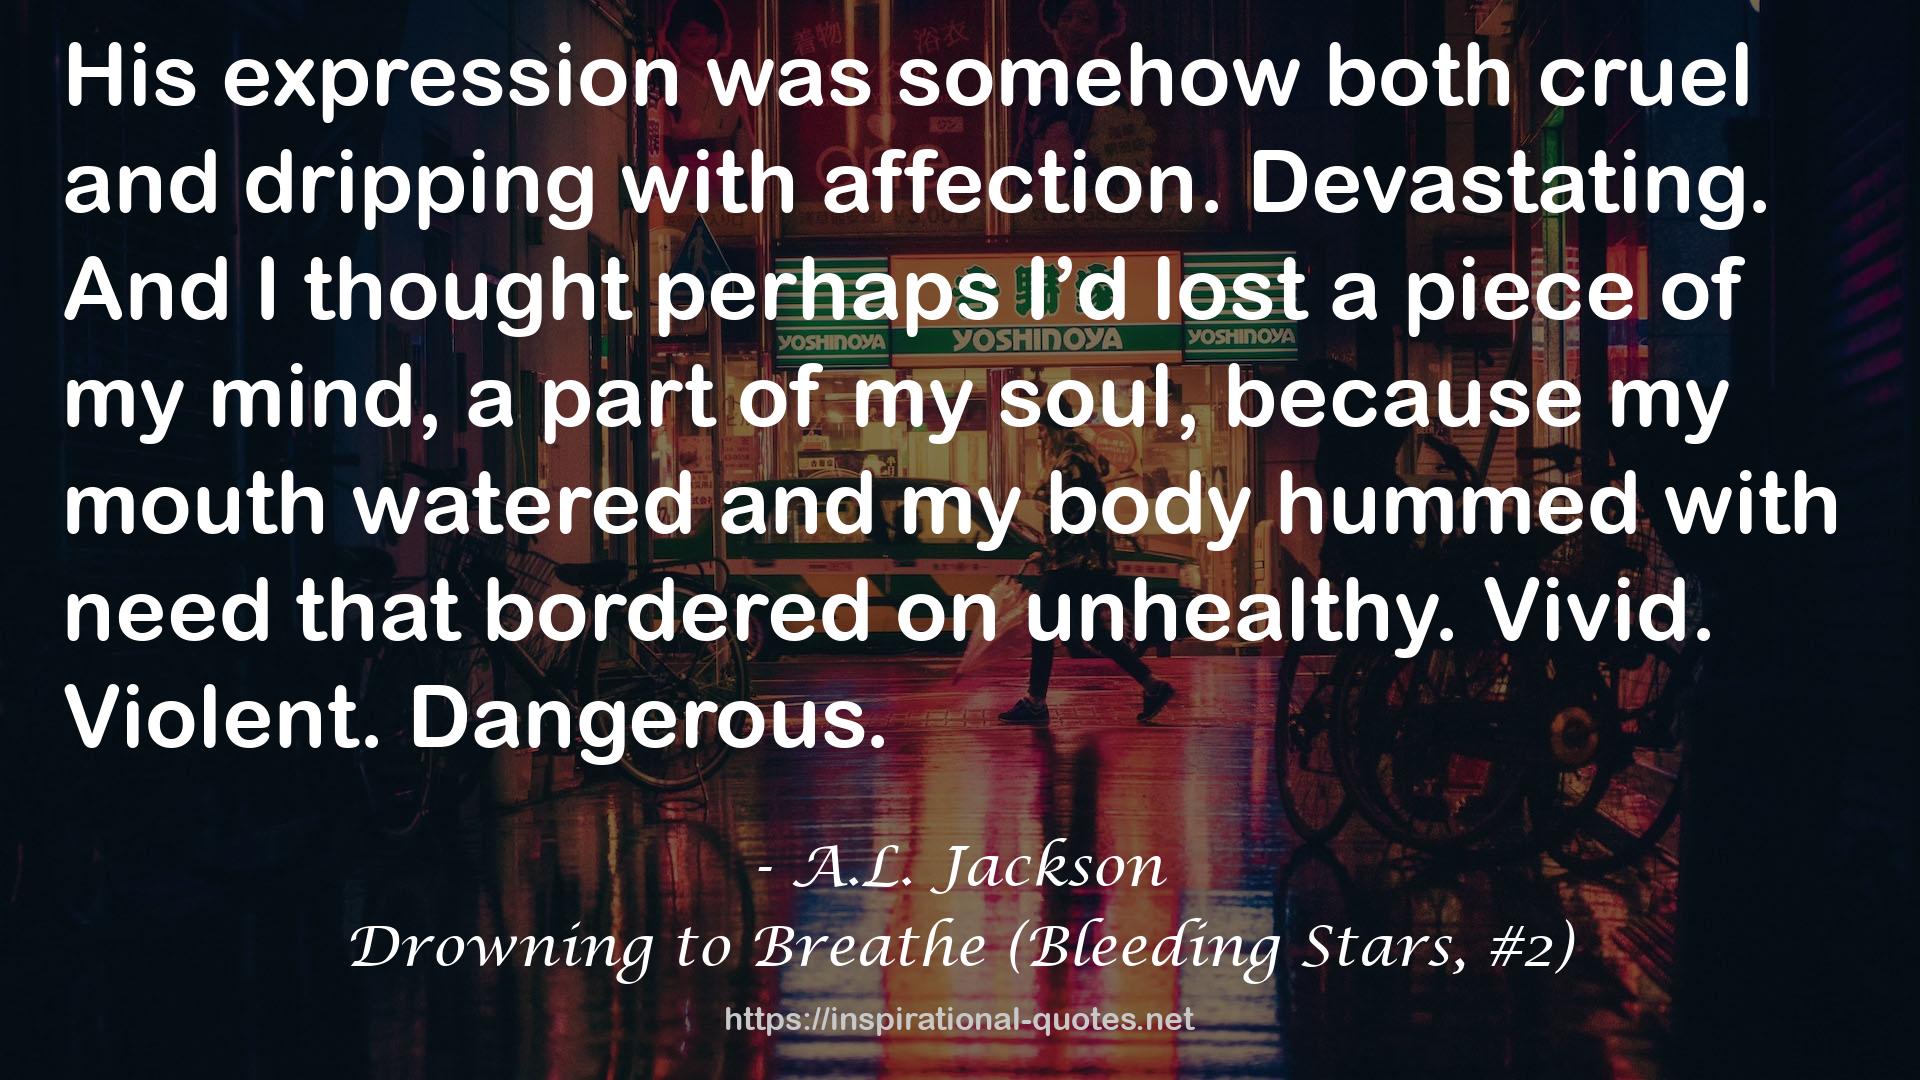 Drowning to Breathe (Bleeding Stars, #2) QUOTES